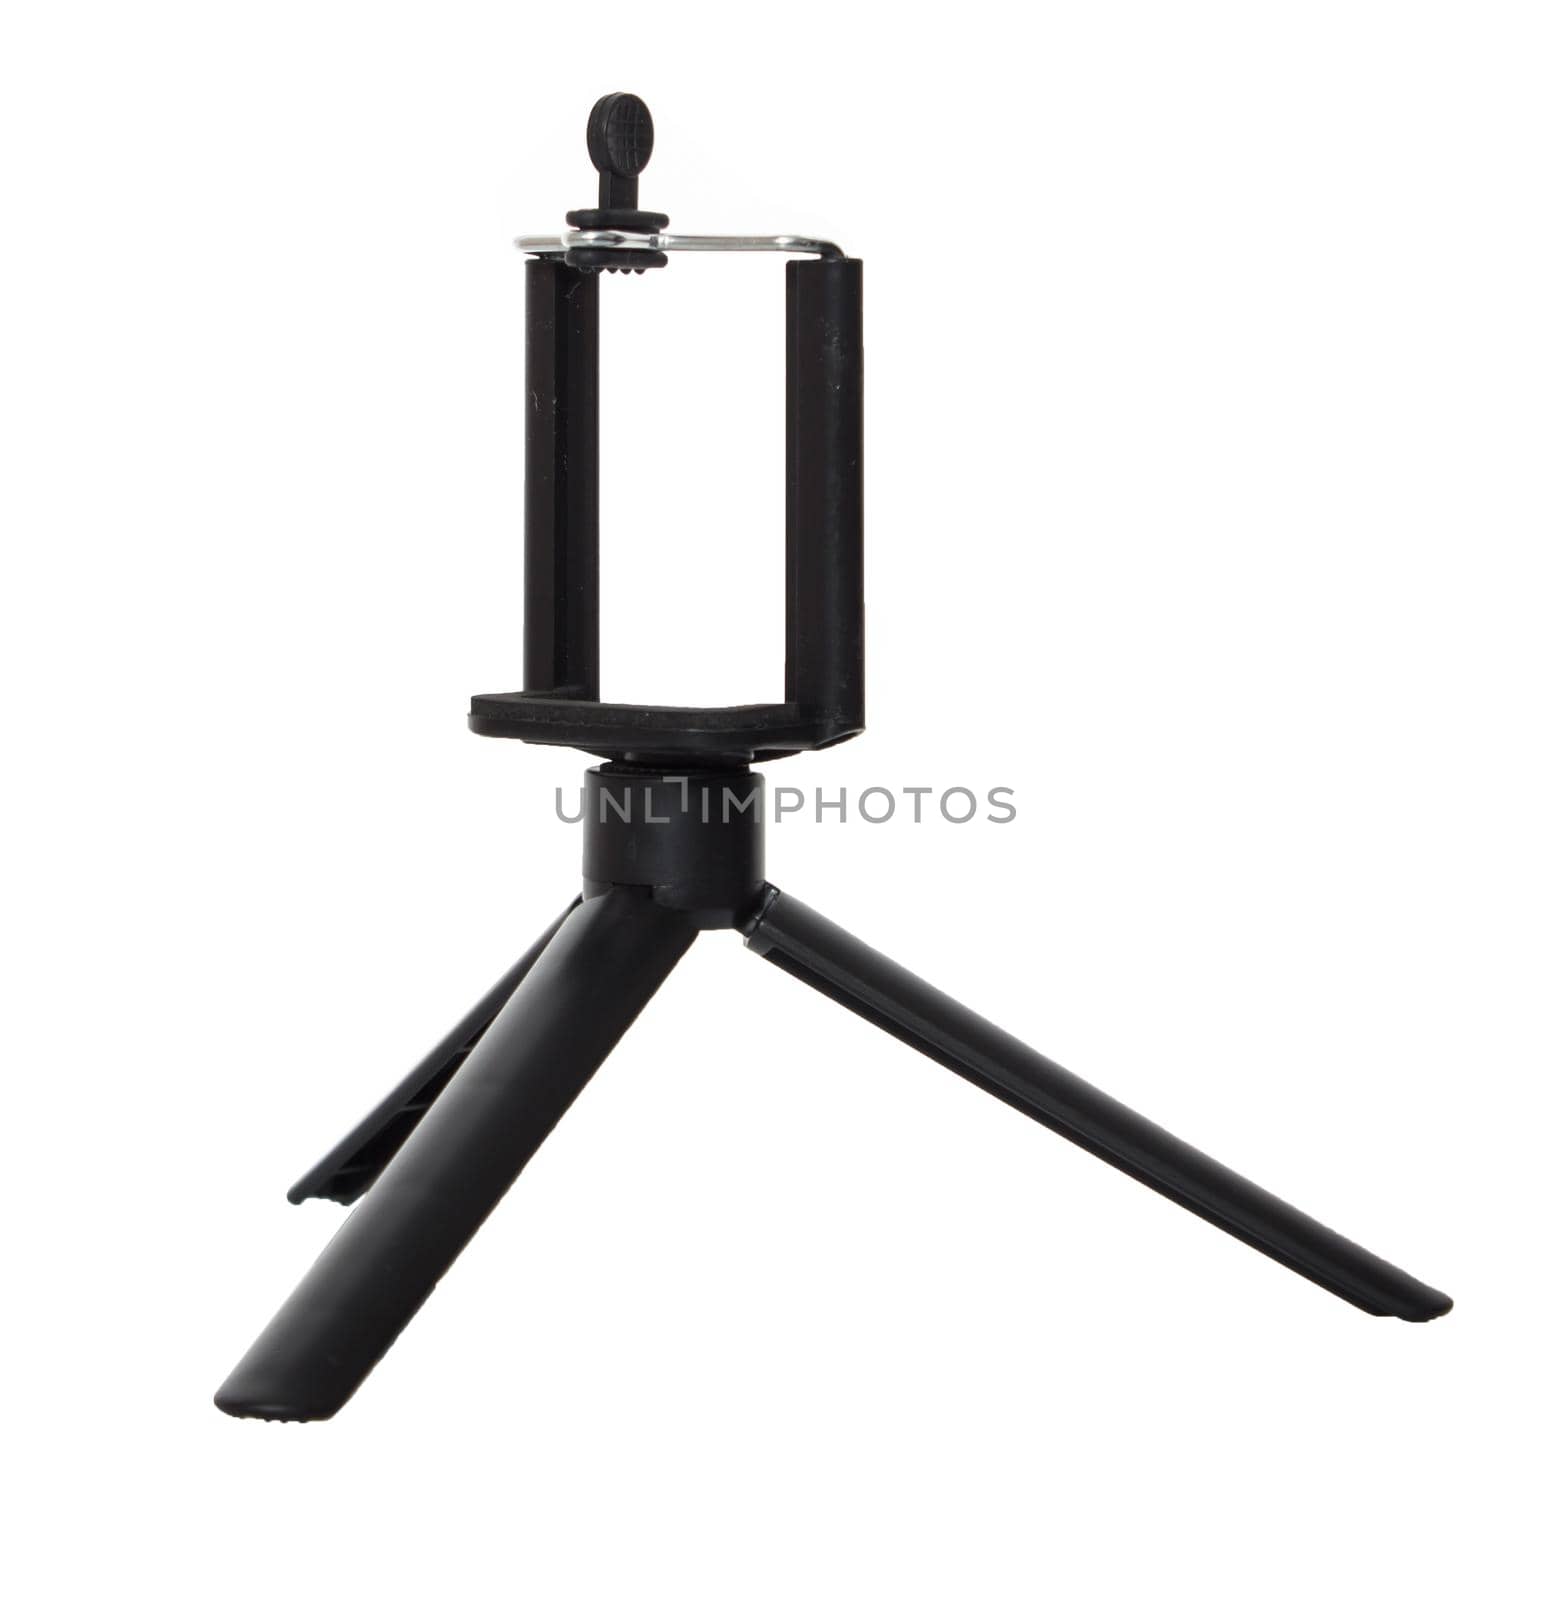 tripod for phone, mini tripod for selfie isolated on white background